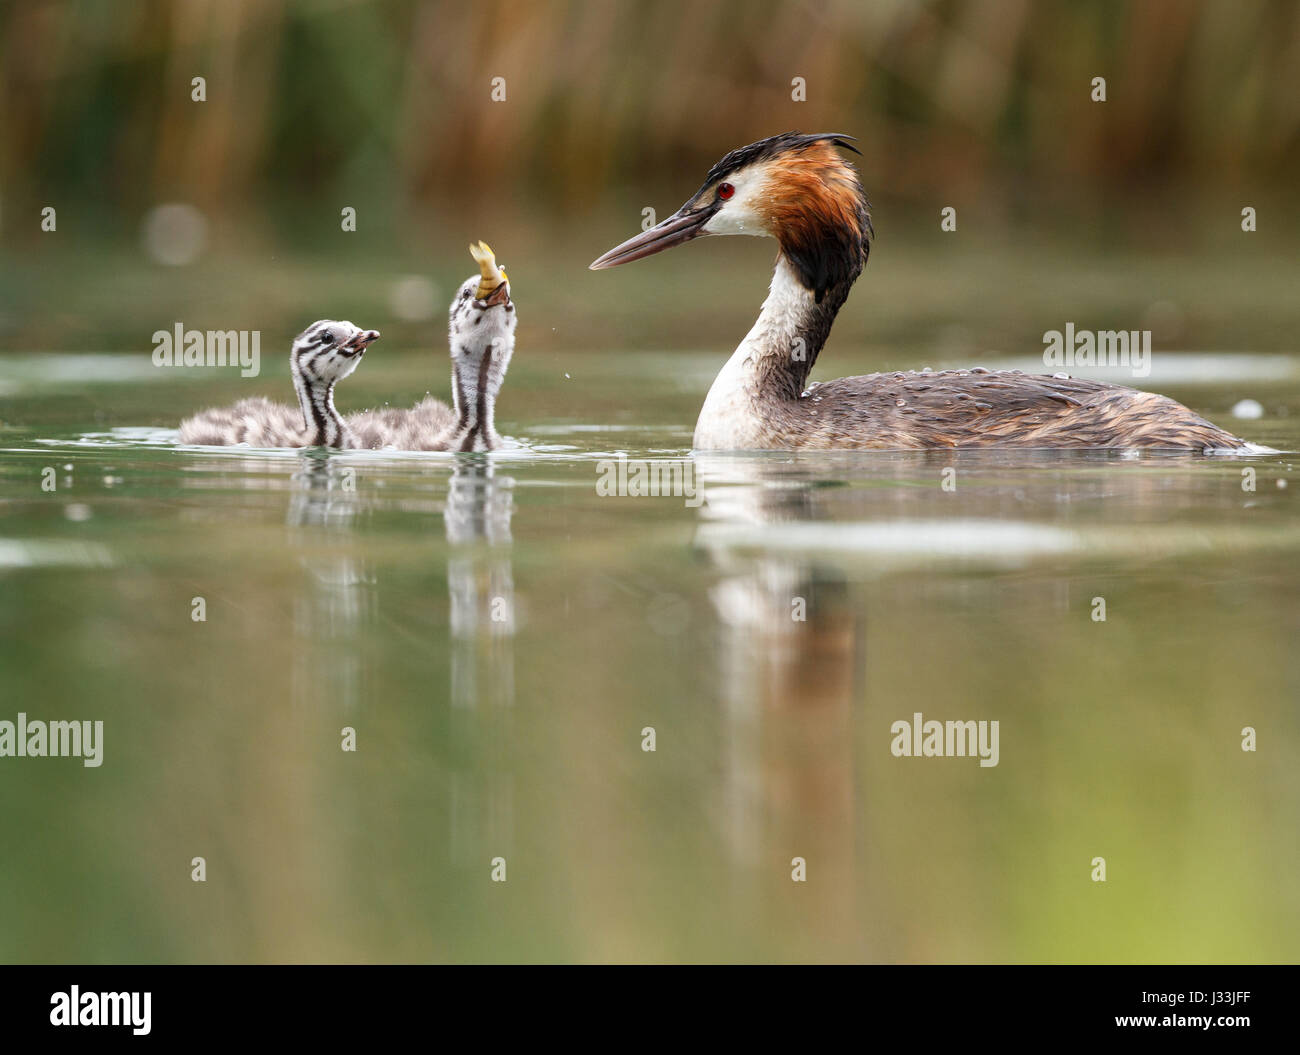 Great crested grebes (Podiceps cristatus) with young birds in the lake, feeding, Baden-Württemberg, Germany Stock Photo